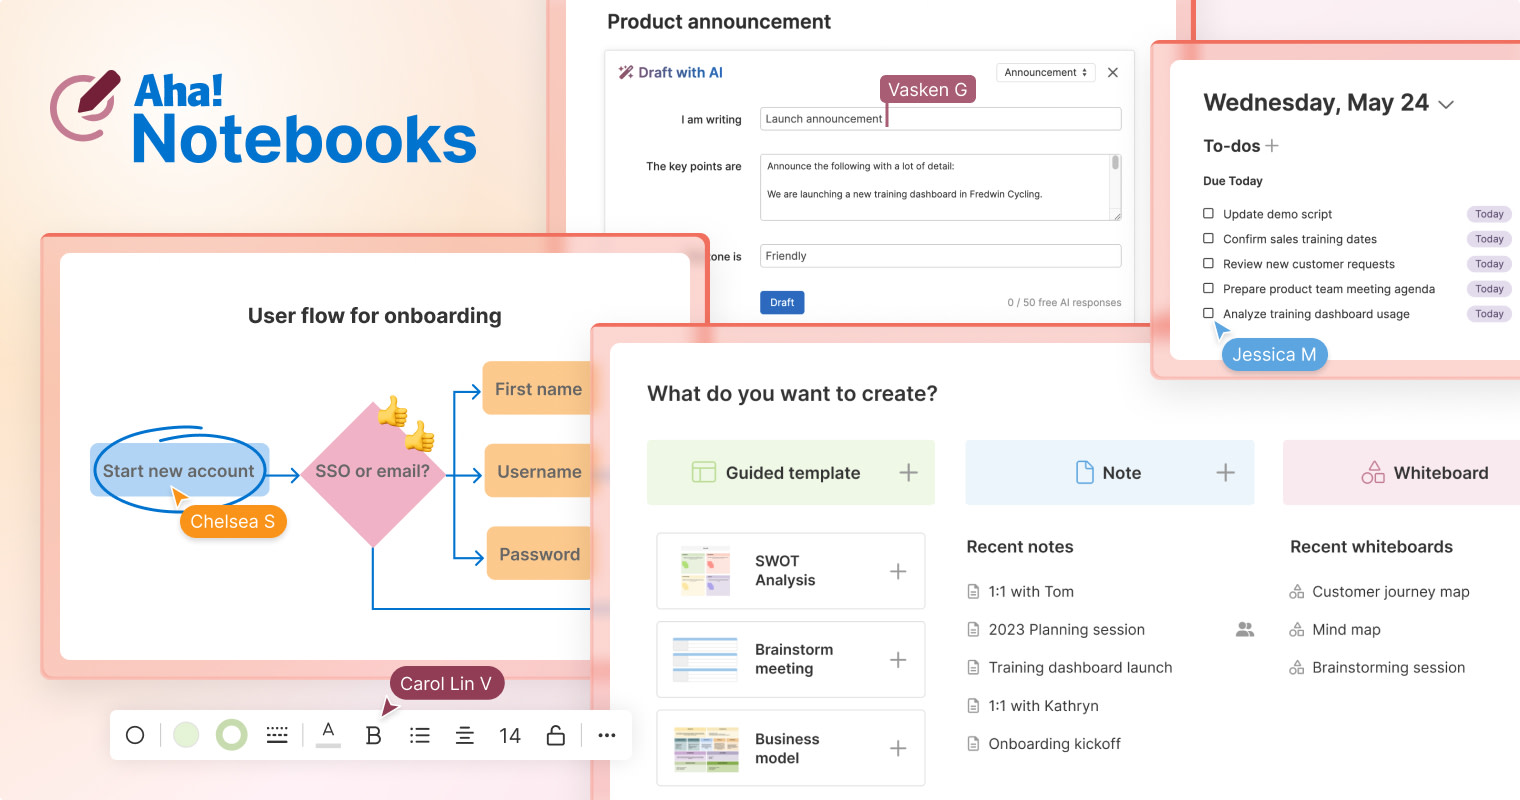 Aha! Notebooks — Your Product Documents, Whiteboards, and Tasks in One Place